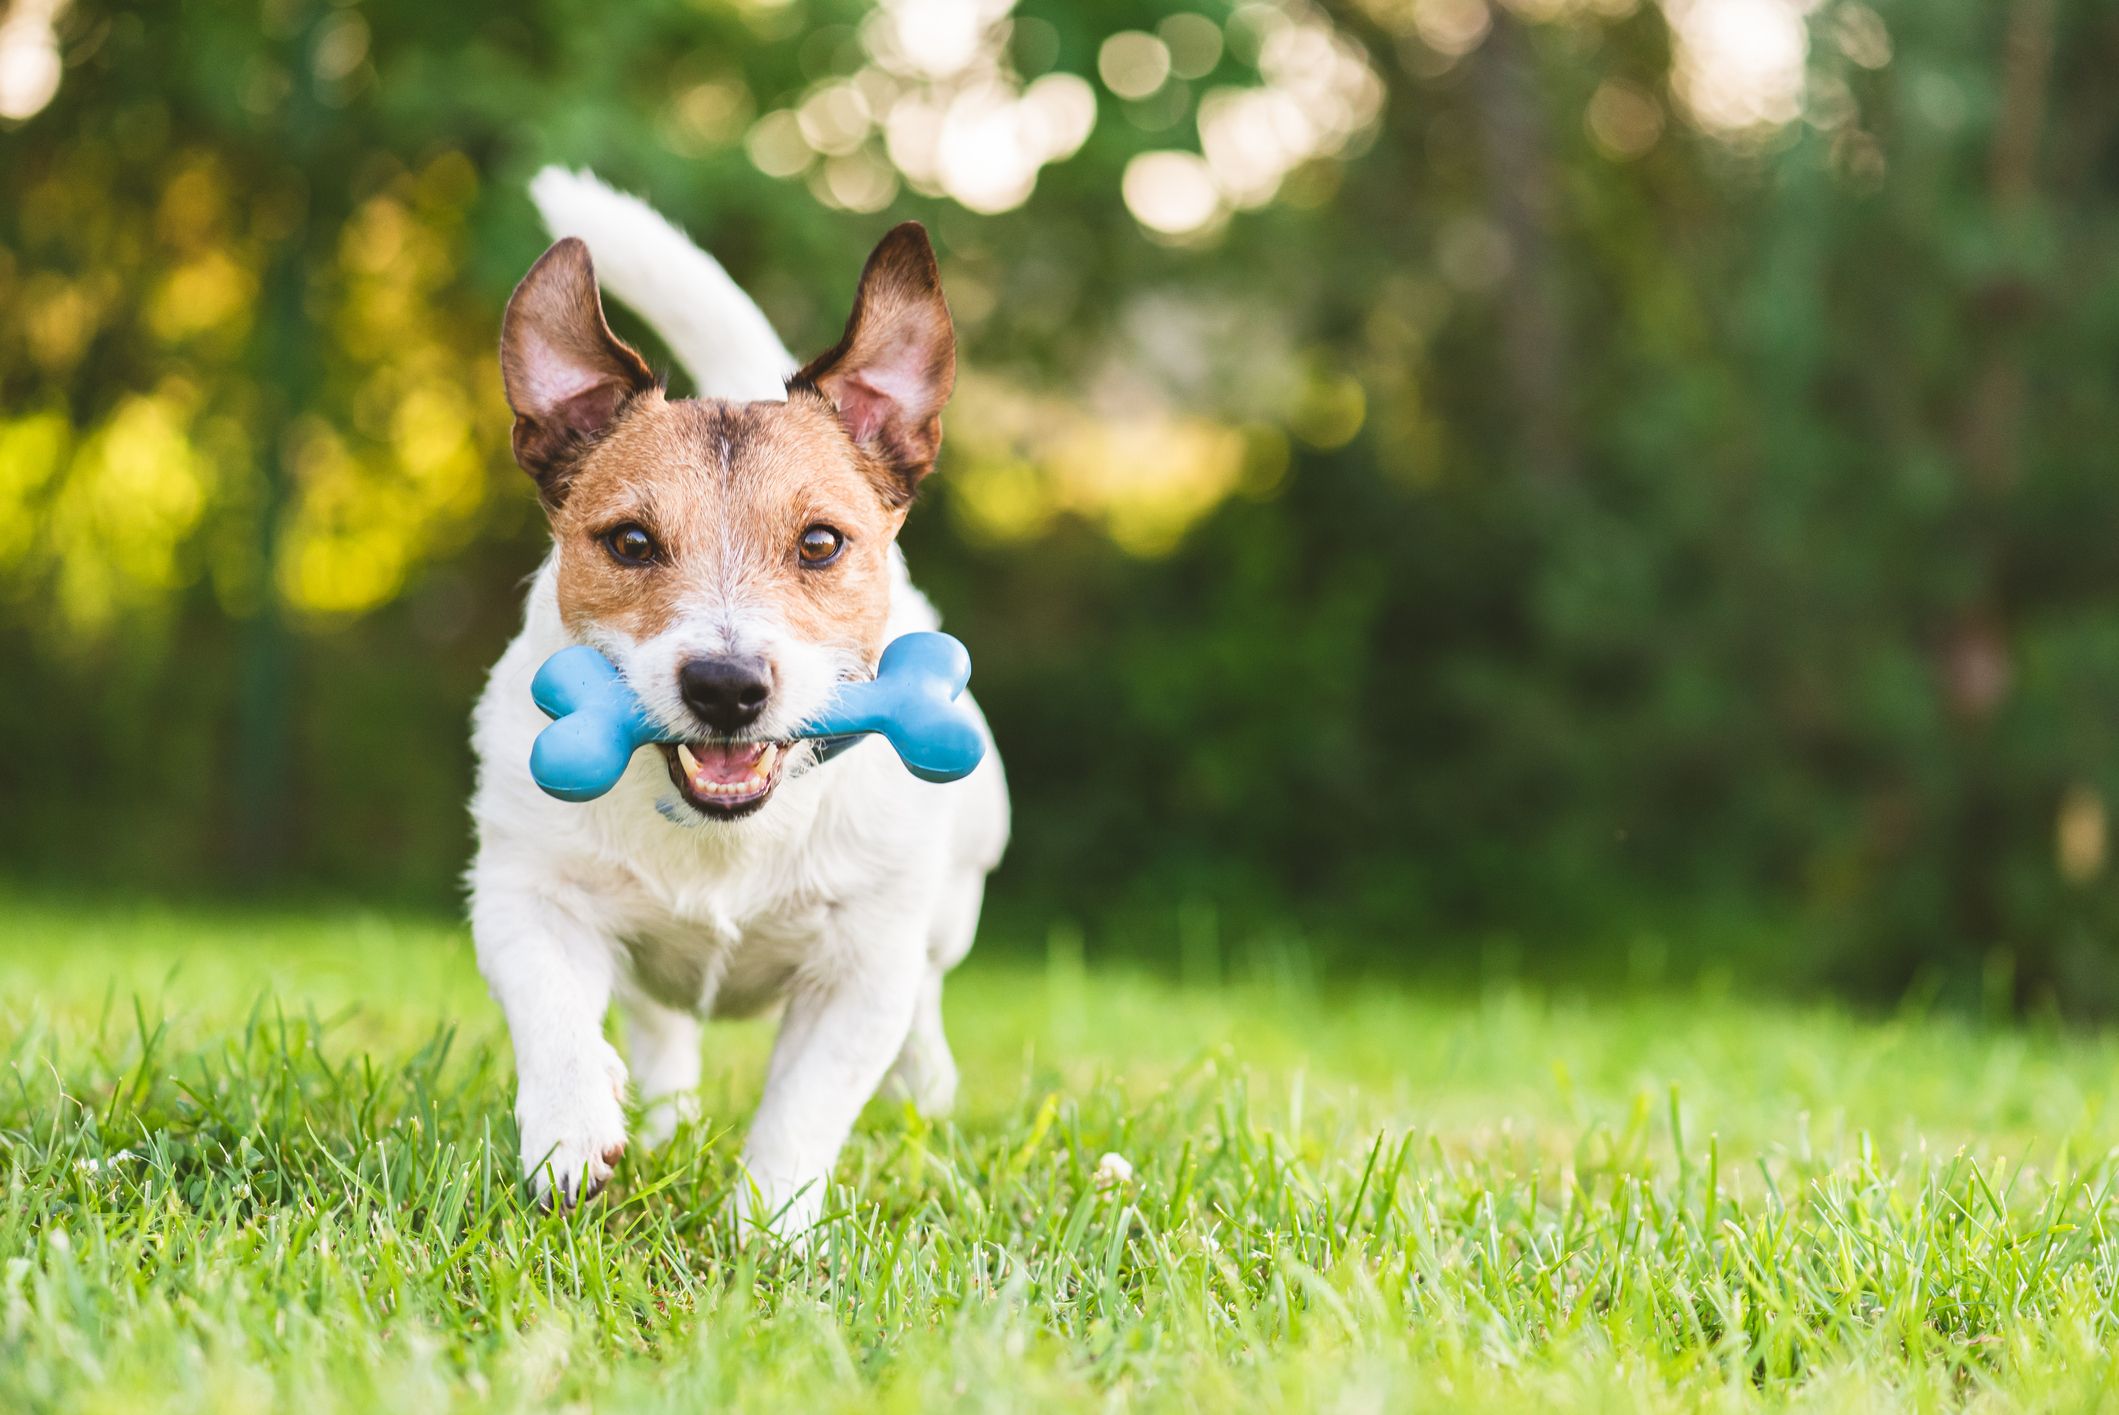 C:\Users\PC\Downloads\happy-and-cheerful-dog-playing-fetch-with-toy-bone-royalty-free-image-1590068781.jpg